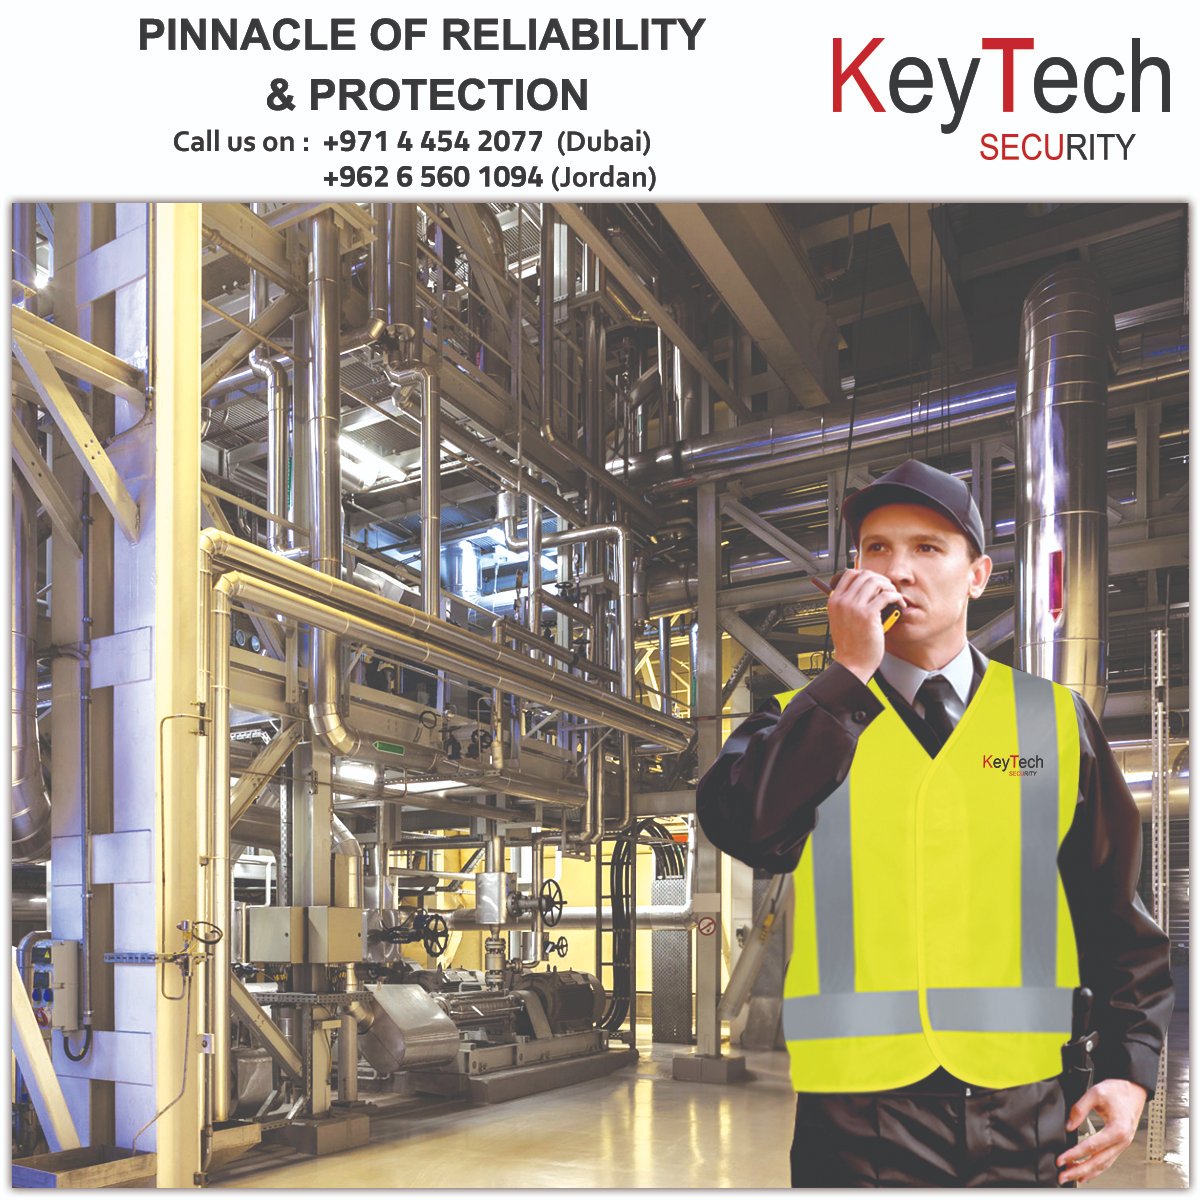 Our #SecurityGuards create a secure environment for smooth workflow by monitoring surroundings & maintain optimum equipment controls. For info, visit https://t.co/WJ1o8PHwed / email at info@keytechsecurityinternational.com / call at +97144542077 (Dubai) or +96265601094 (Jordan). https://t.co/eTHKh1UdxK